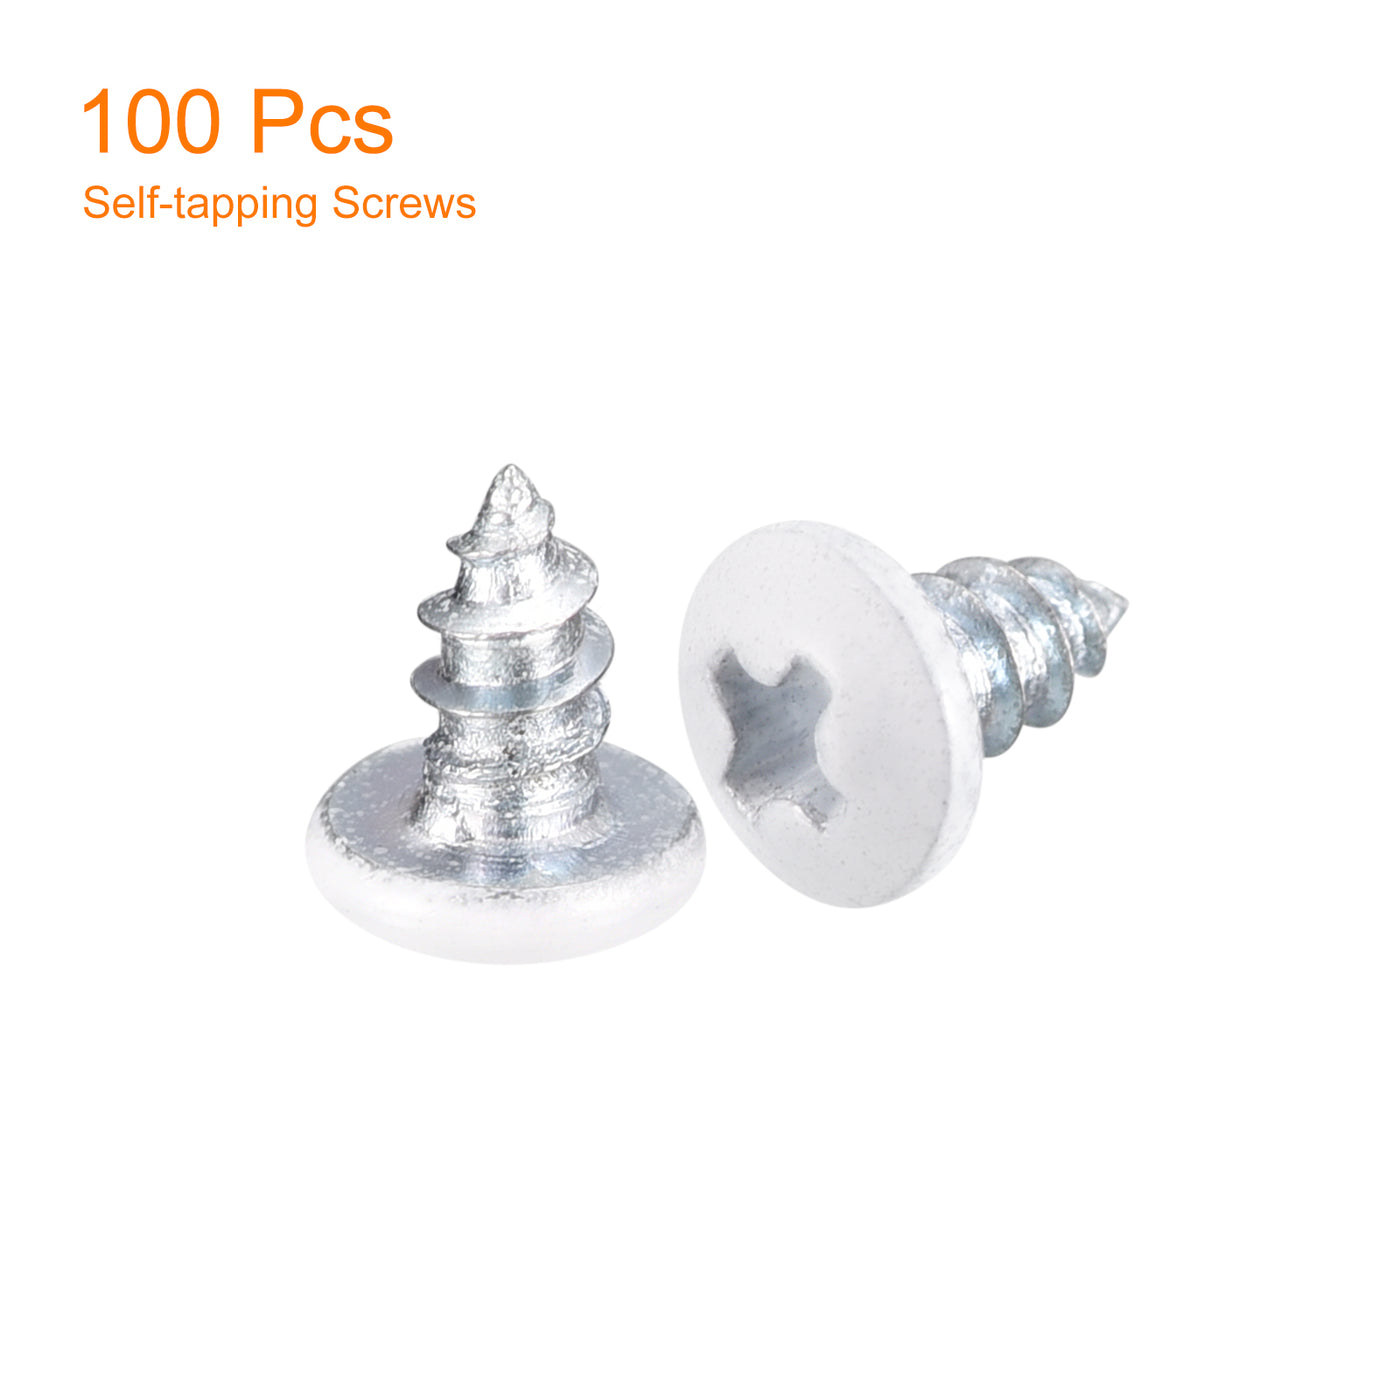 uxcell Uxcell ST2.5x6mm White Screws Self Tapping Screws, 100pcs Pan Head Phillips Screws